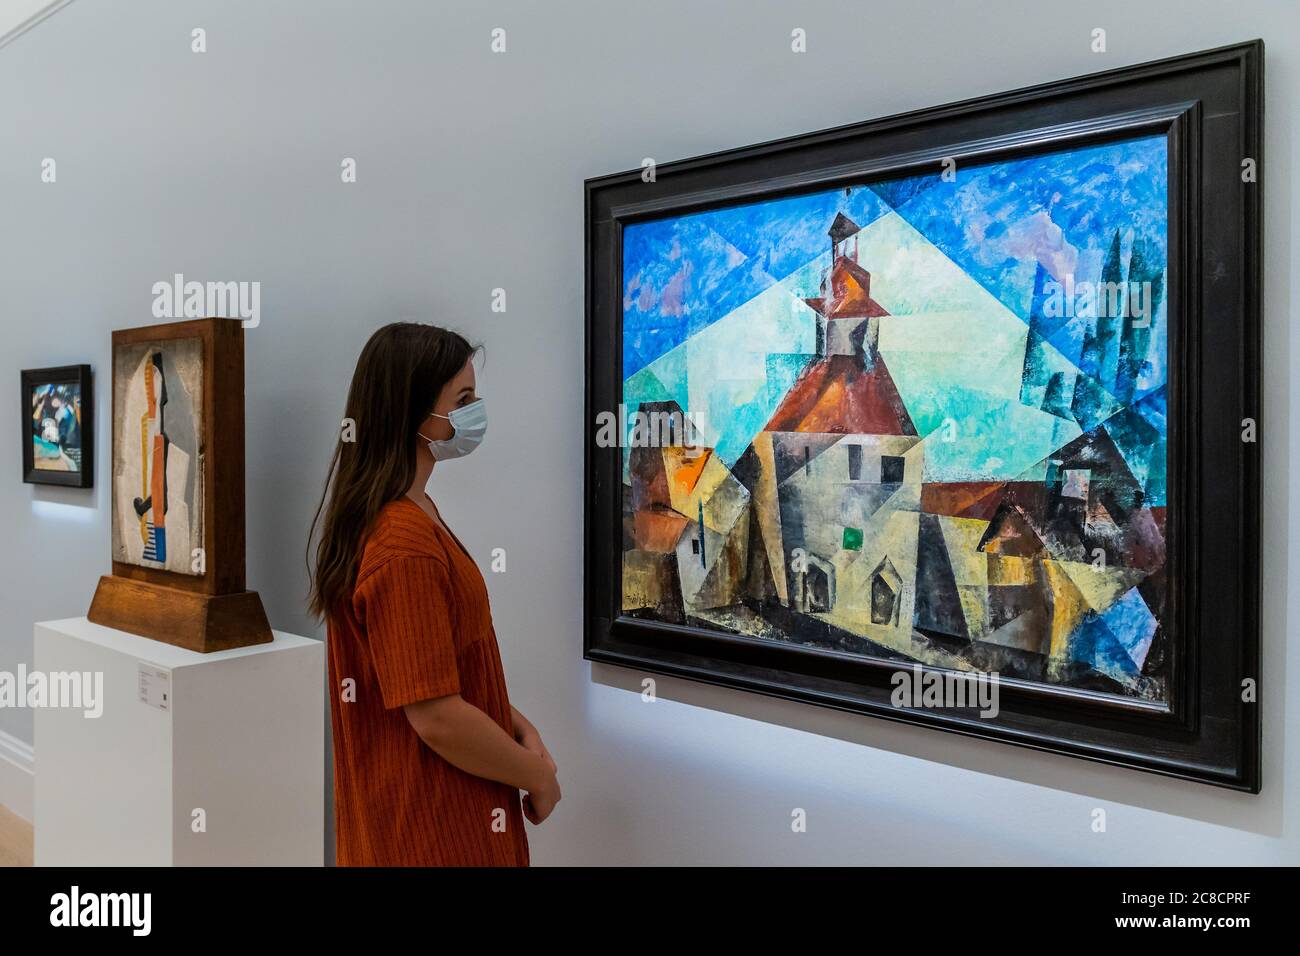 EMBARGOED TILL 0900 GMT 24/7/20 - Lyonel Feininger, Zottelstedt II (Town Hall II), Estimate: £2-3 million - Sotheby's London present a preview of a one-off auction and exhibition that spans over half a millennium of art history. From Rembrandt to Richter, the sale will offer Old Masters, Impressionist & Modern Art, Modern & Post-War British Art and Contemporary Art - travelling through the Italian Renaissance and the Dutch Golden Age, to the revolutionary birth of Modernism, and the invasion of Pop Art and Post-modern Abstraction. The exhibition has opened to the public in Sotheby's New Bond S Stock Photo